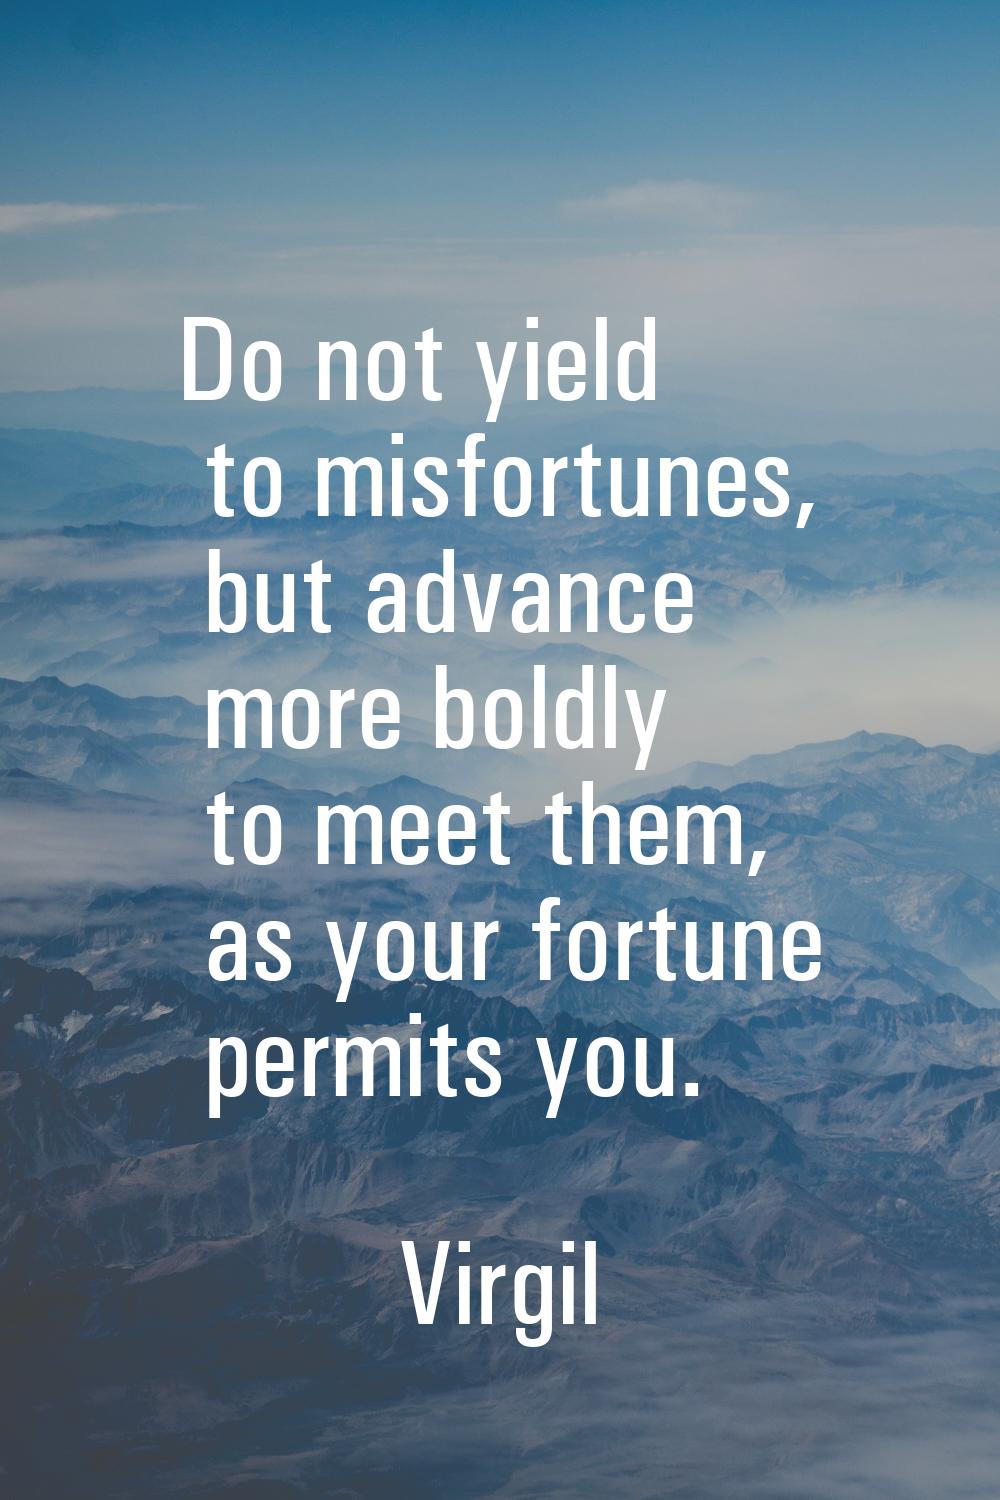 Do not yield to misfortunes, but advance more boldly to meet them, as your fortune permits you.